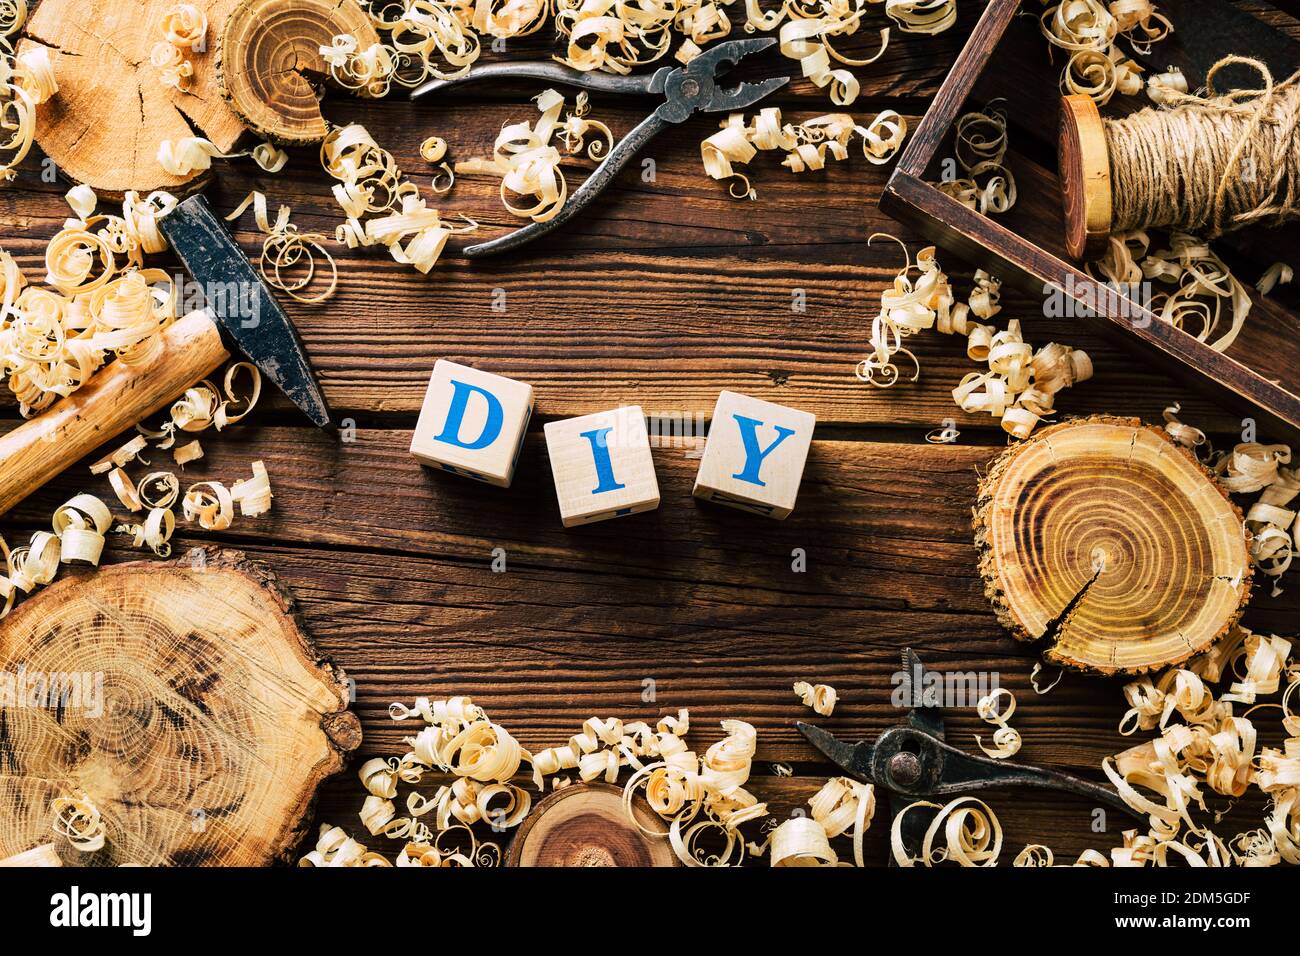 DIY wood. Woodworking workshop. Wood shavings and carpentry tools. background Stock Photo